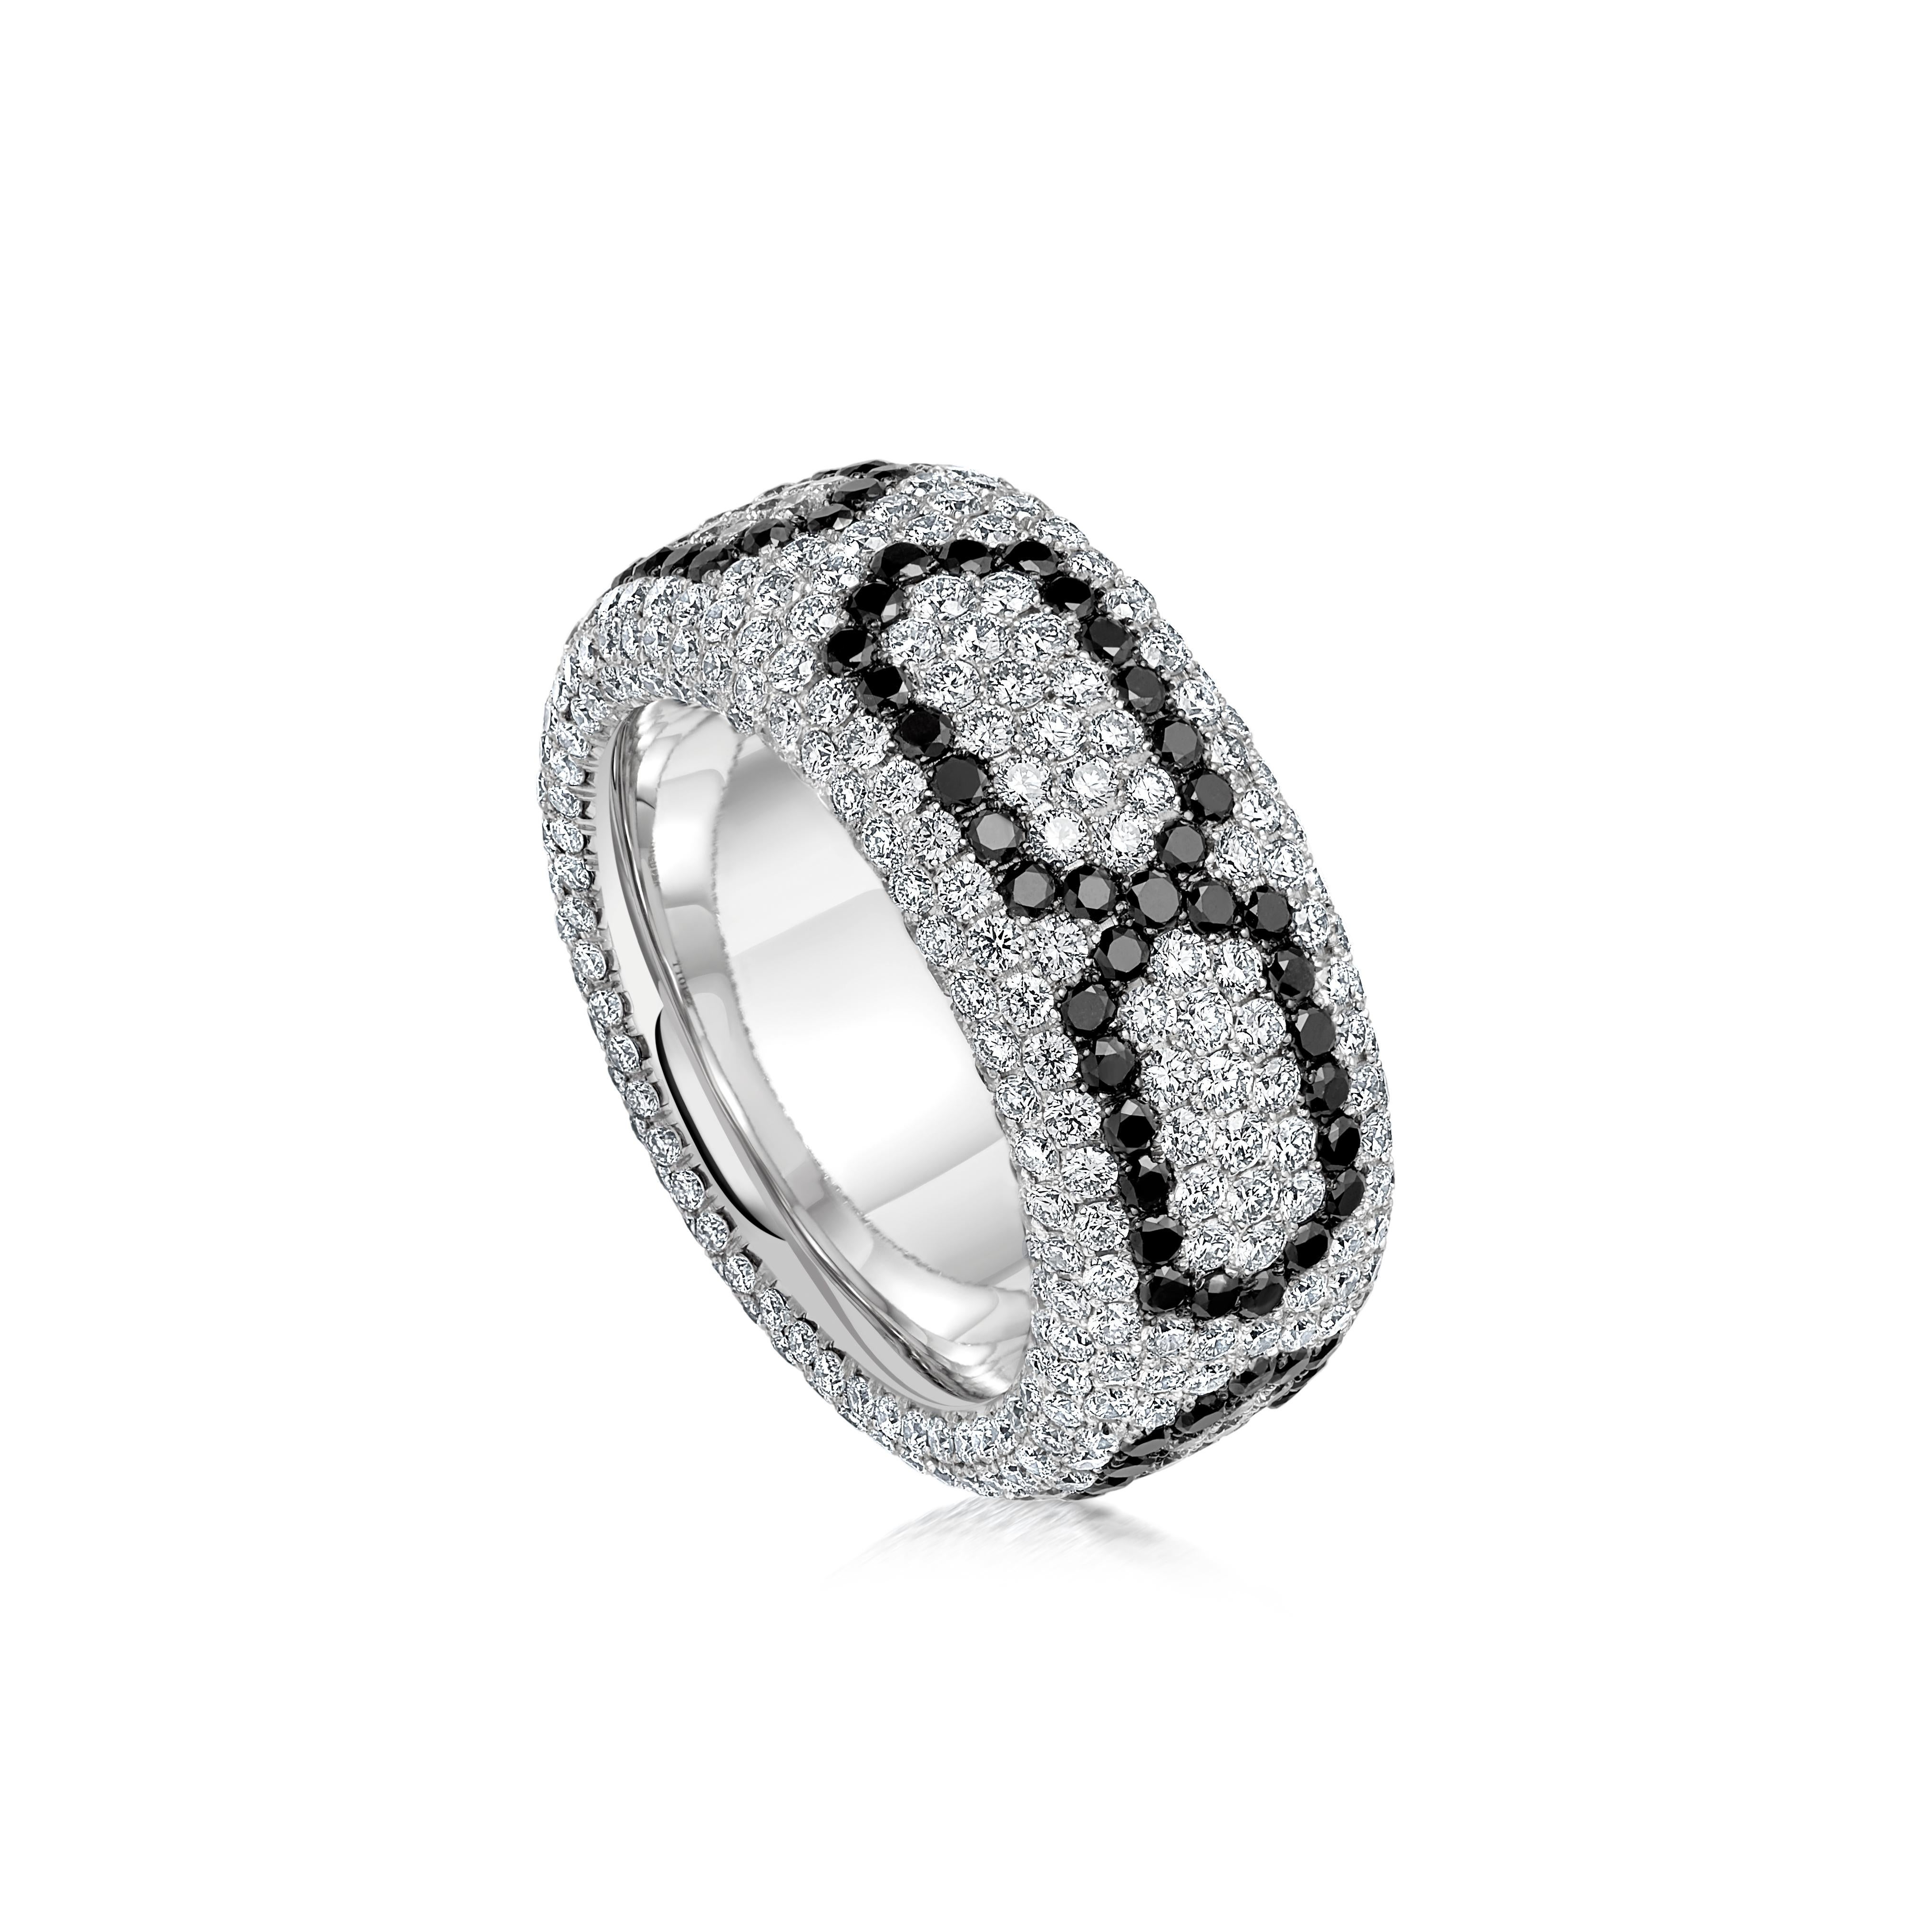 A geometric trail of black diamonds, delicately woven through glistening brilliant cut diamonds, covers the band entirely in a hypnotic pave setting.

Details
Infinity Band Ring
- 18 karat White Gold
- 4.23 carat White Diamond
- 1.28 carat of Black